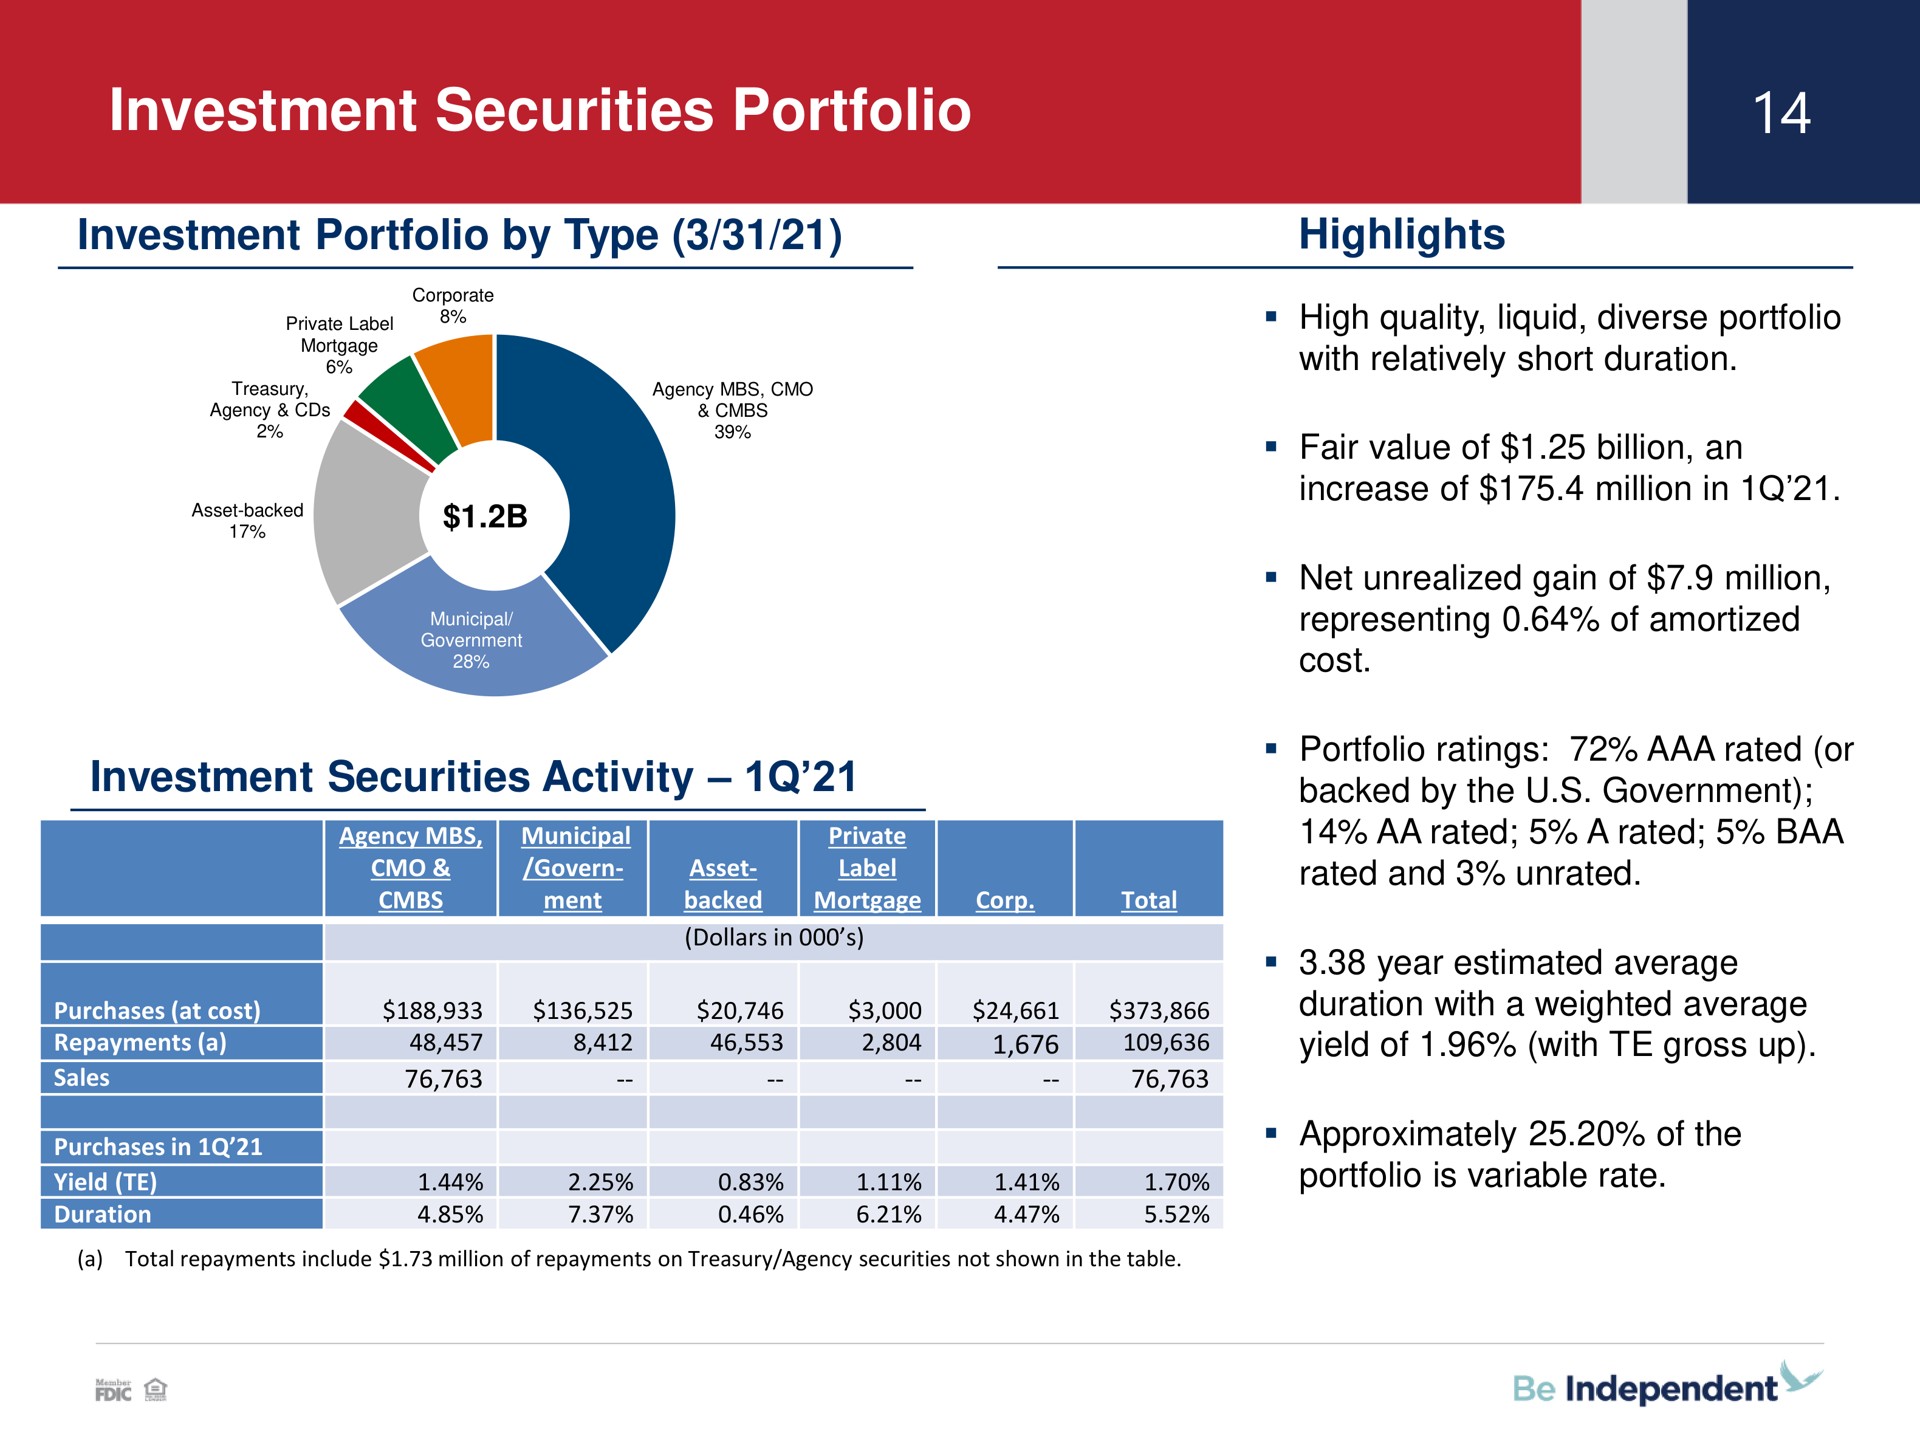 investment securities portfolio we activity with relatively short duration backed by the us government | Independent Bank Corp